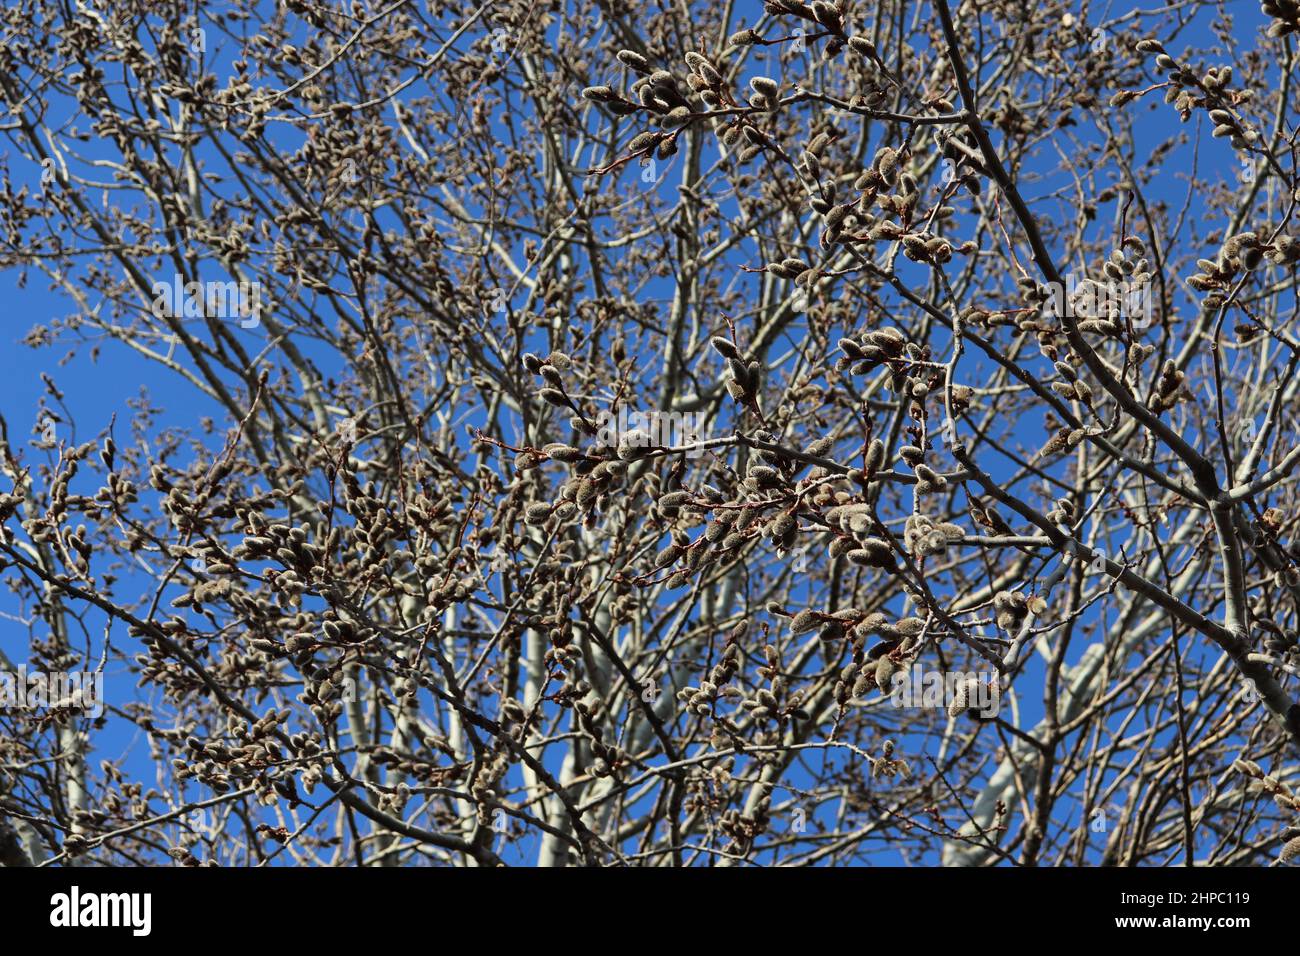 Willow tree catkins in spring against the blue sky. Stock Photo